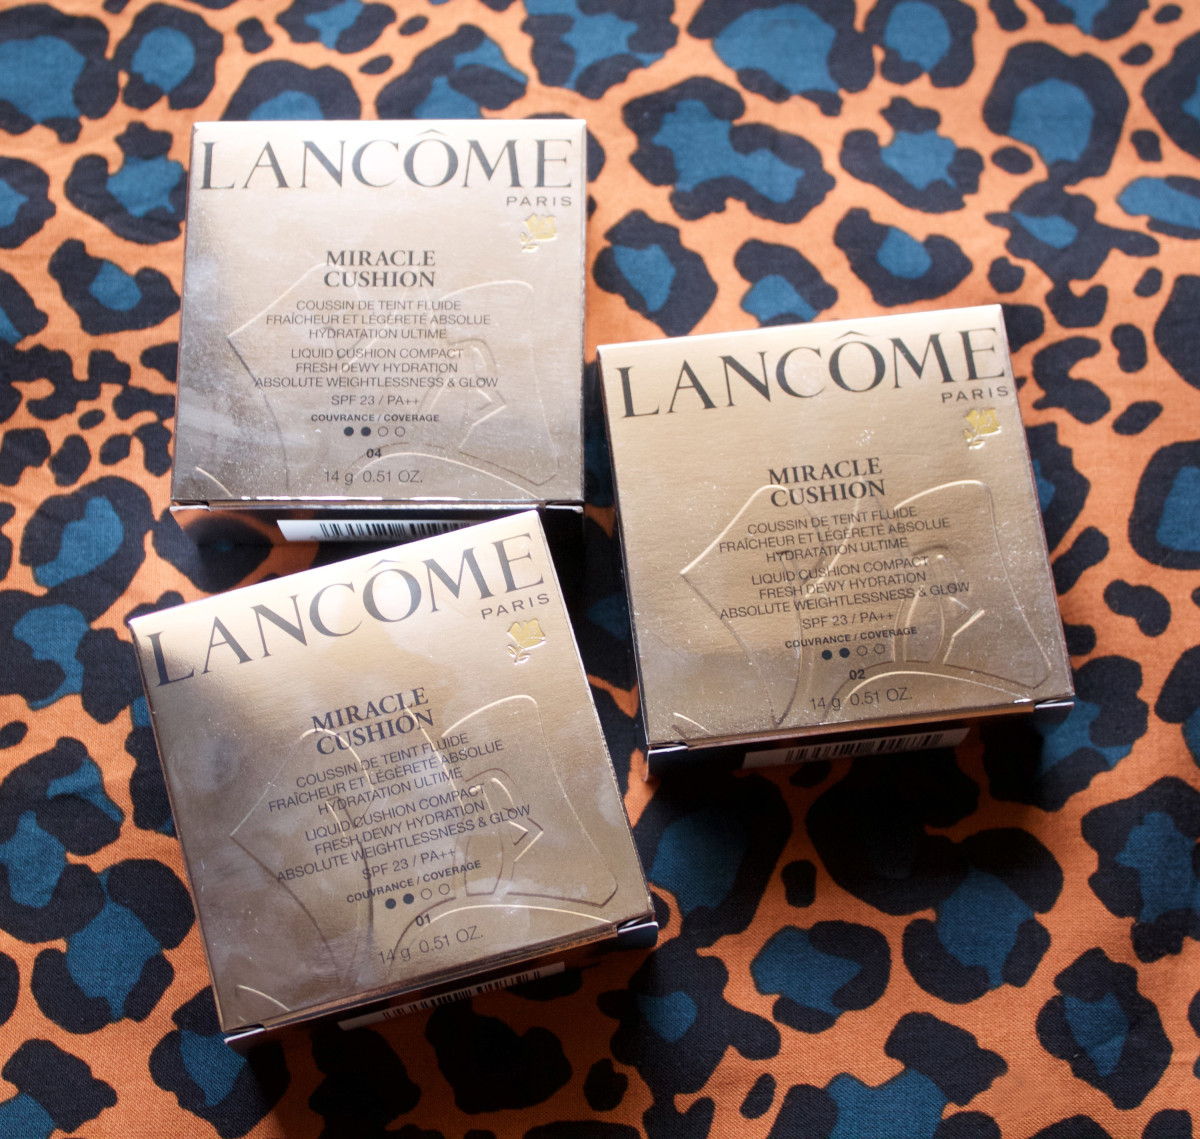 Lancôme’s New Miracle Cushion Totally Lives Up To Its Name